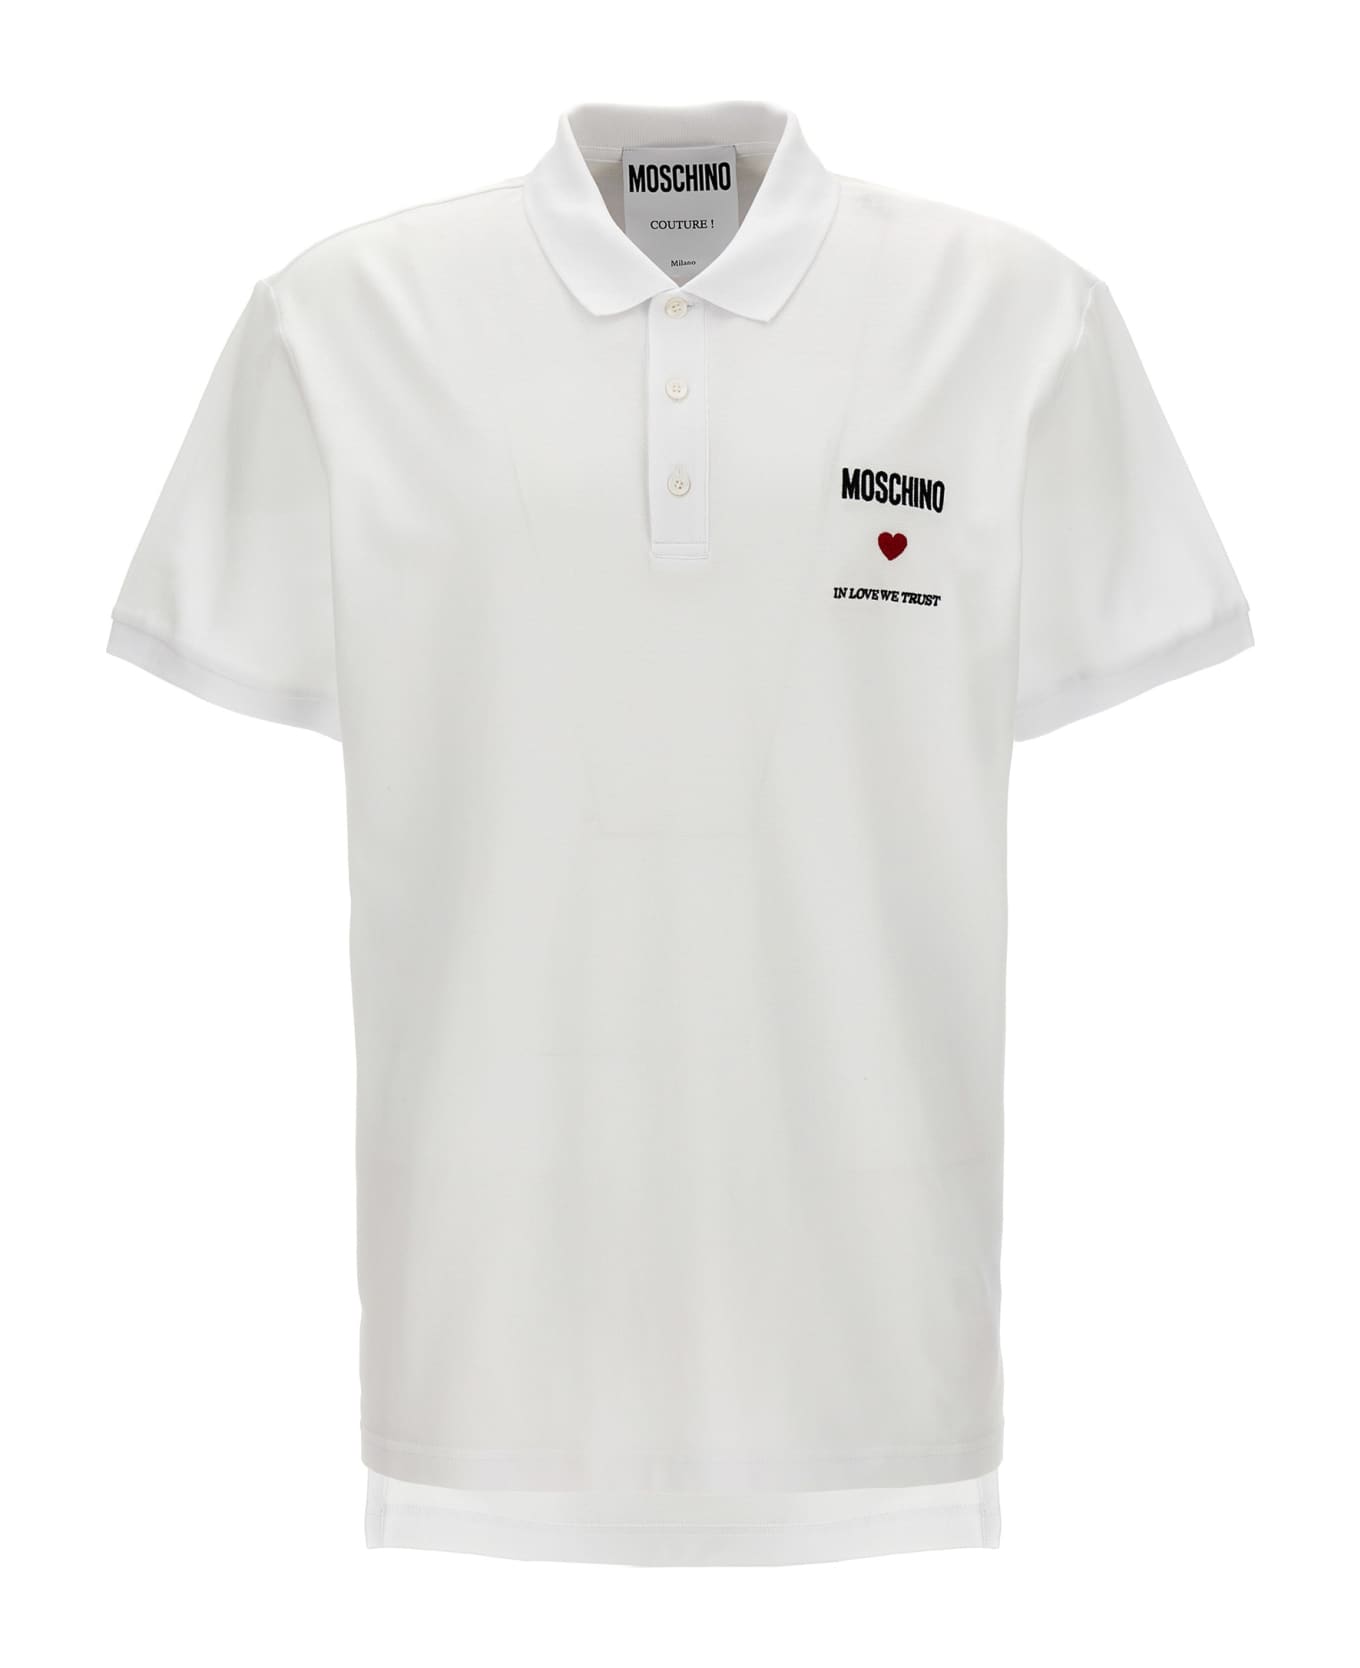 Moschino 'in Love We Trust' Polo Shirt - White ポロシャツ